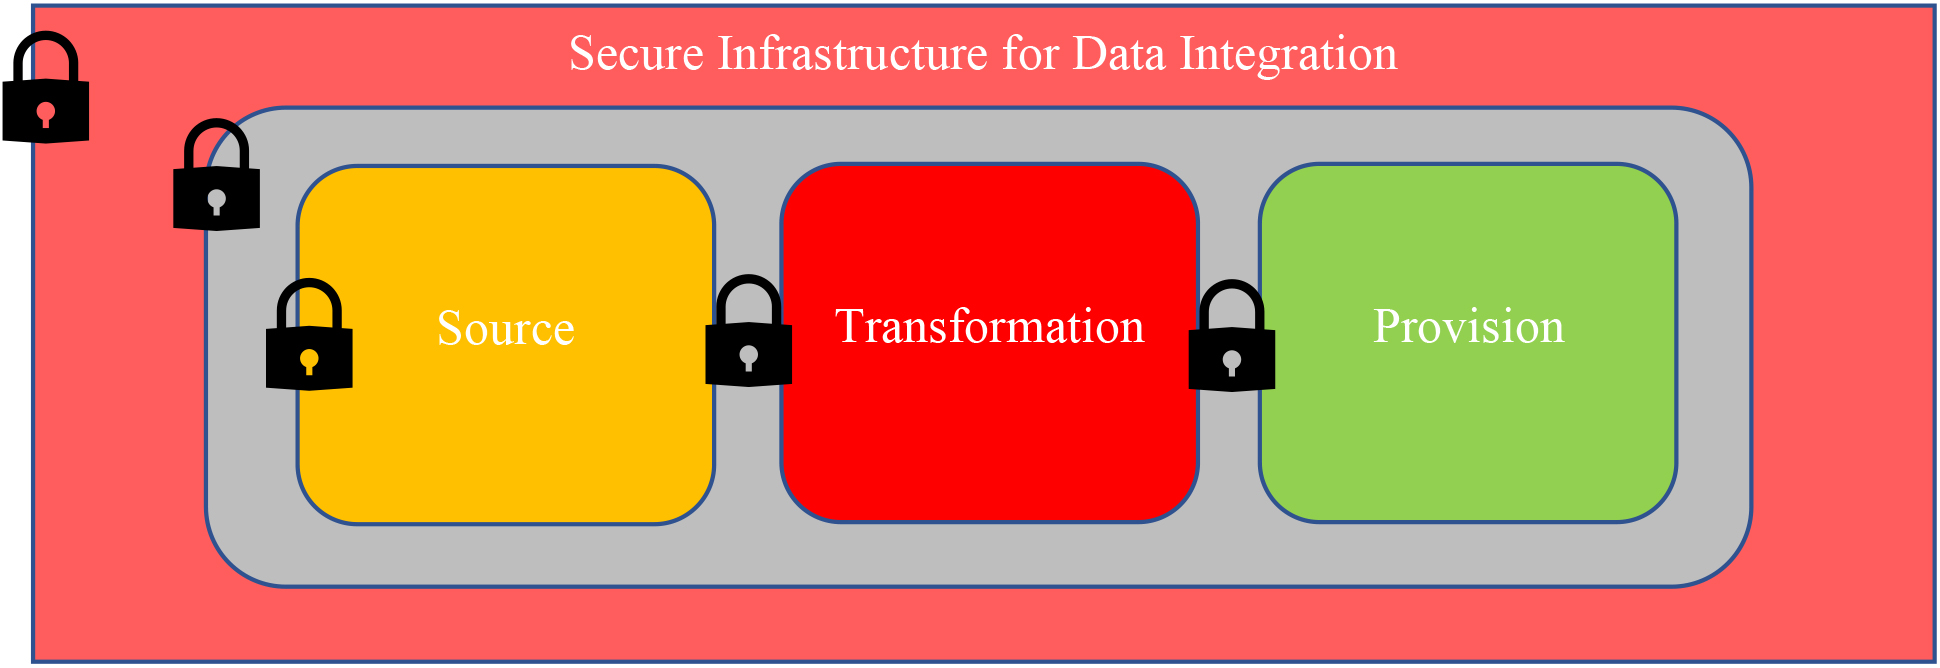 High-level overview of the Secure Infrastructure for Data Integration.